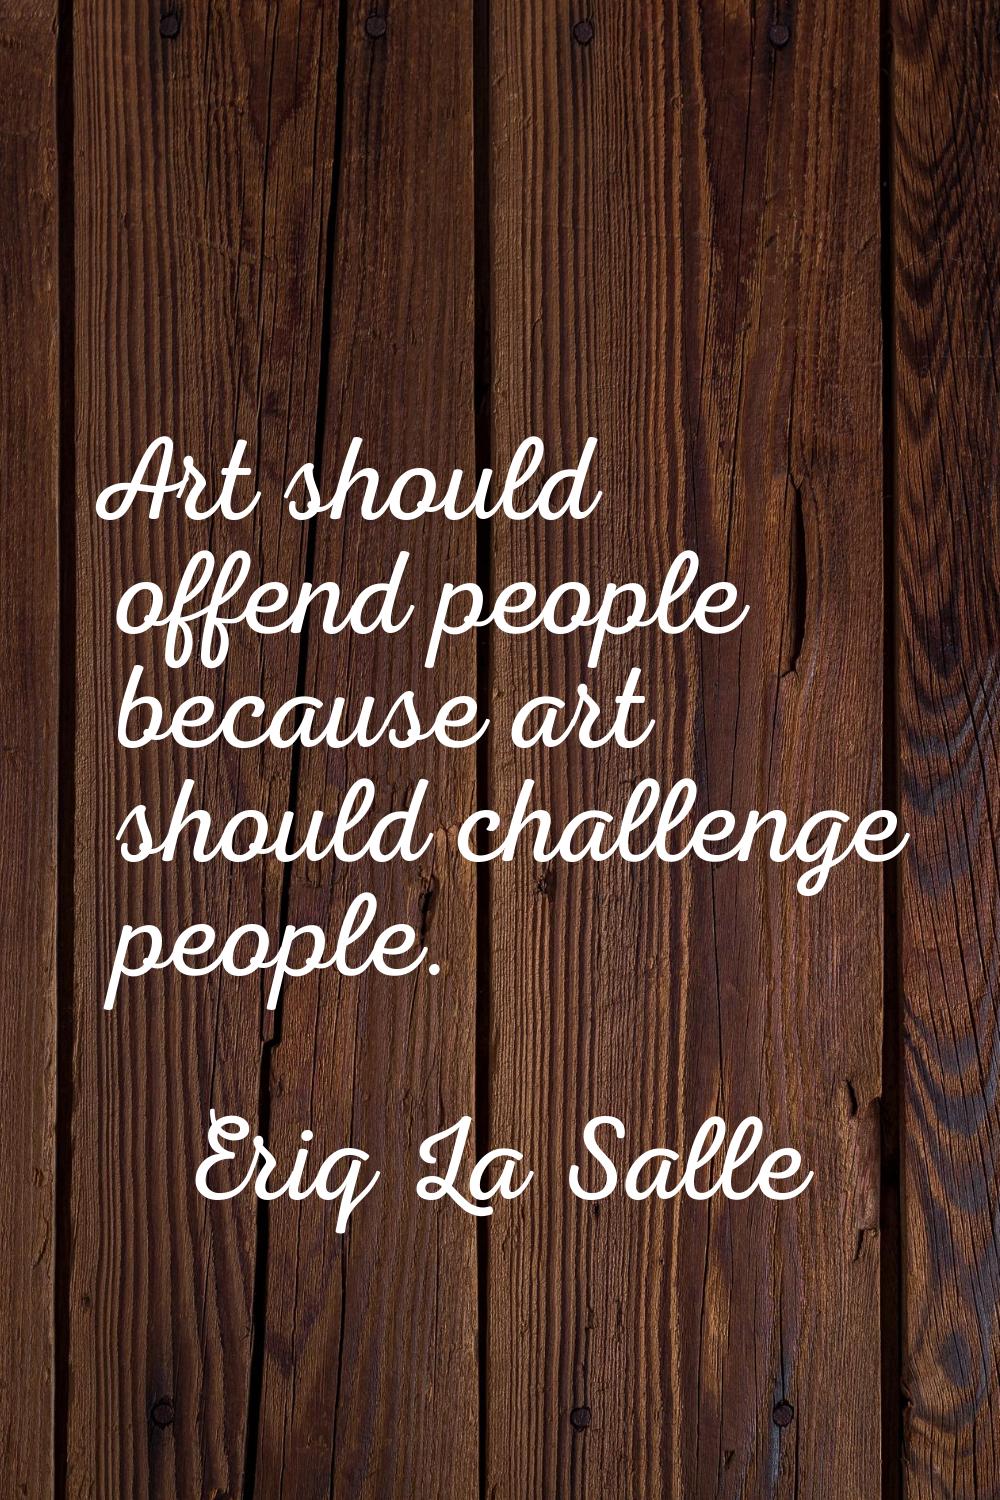 Art should offend people because art should challenge people.